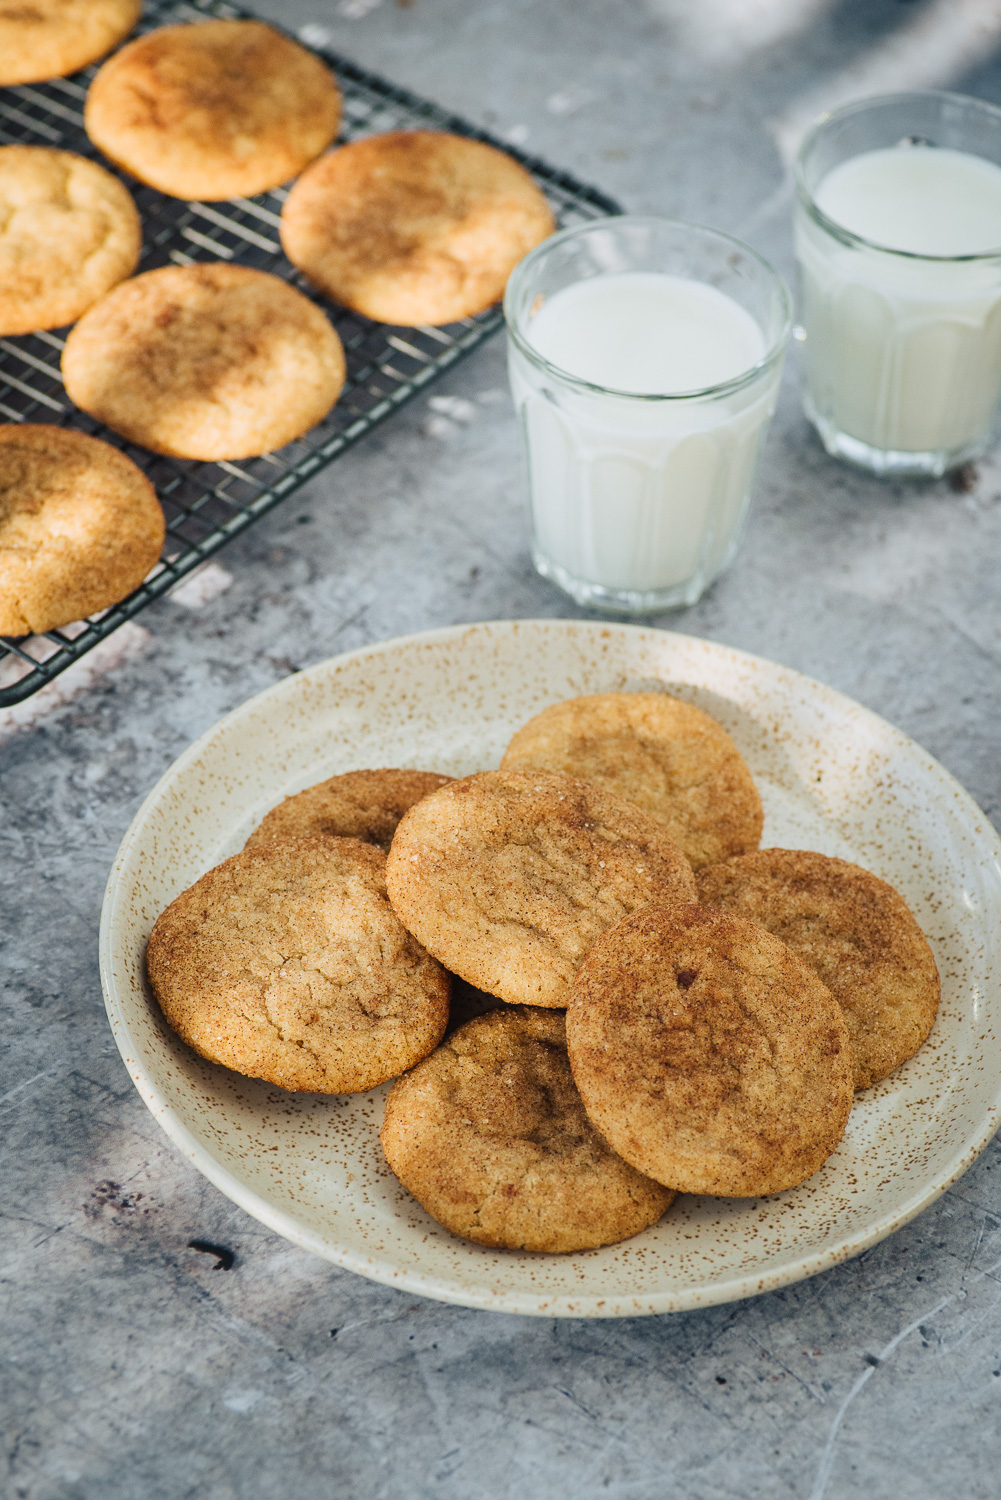 Soft and spiced snickerdoodles cookies | Get the recipe on Mondomulia food blog